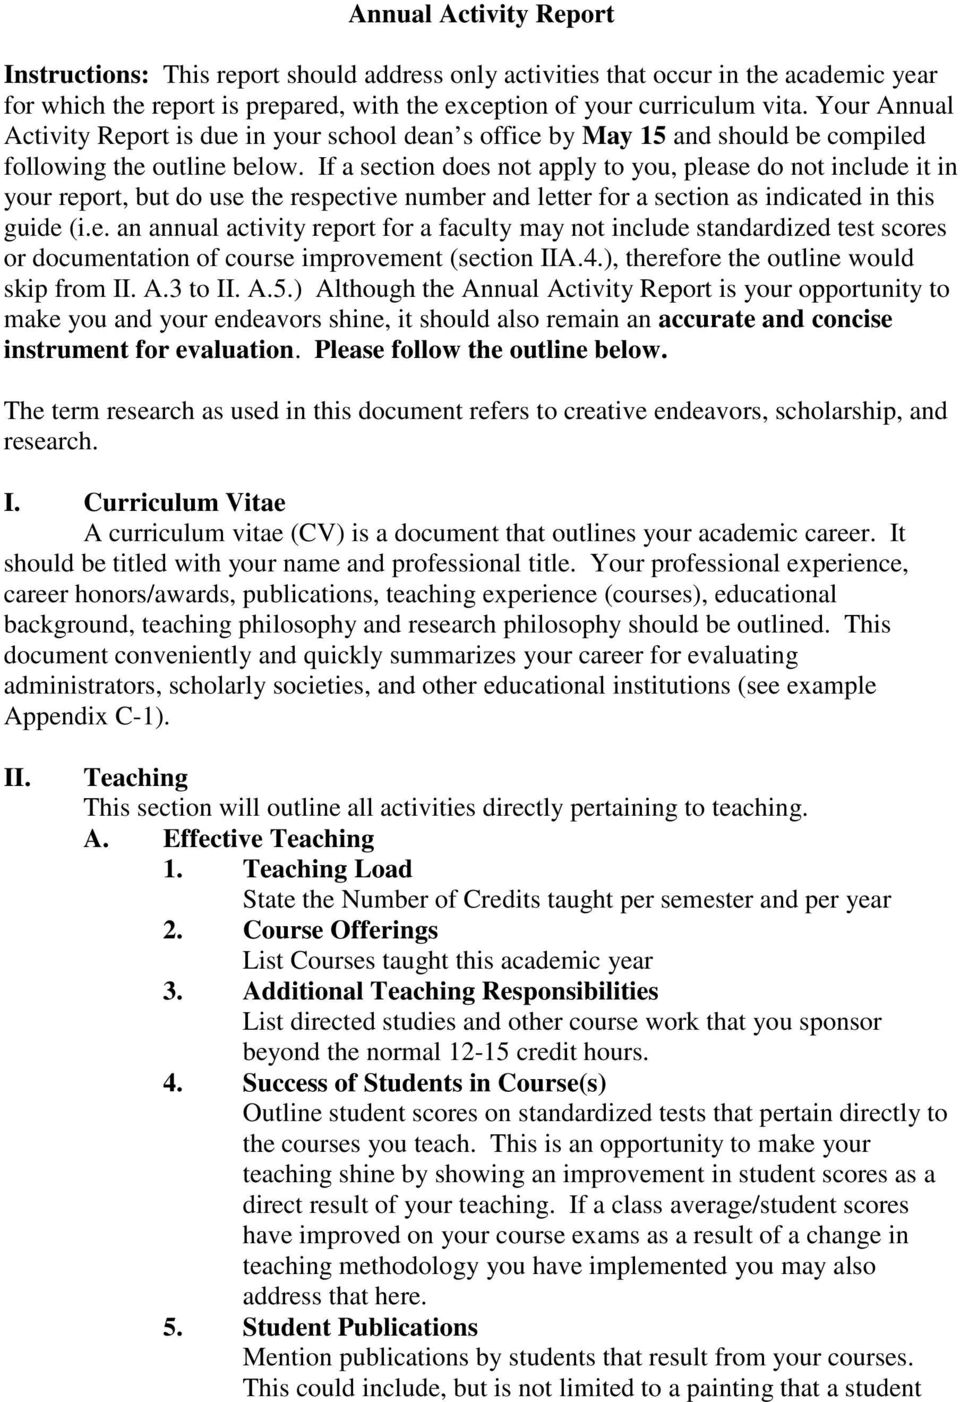 If a section does not apply to you, please do not include it in your report, but do use the respective number and letter for a section as indicated in this guide (i.e. an annual activity report for a faculty may not include standardized test scores or documentation of course improvement (section IIA.